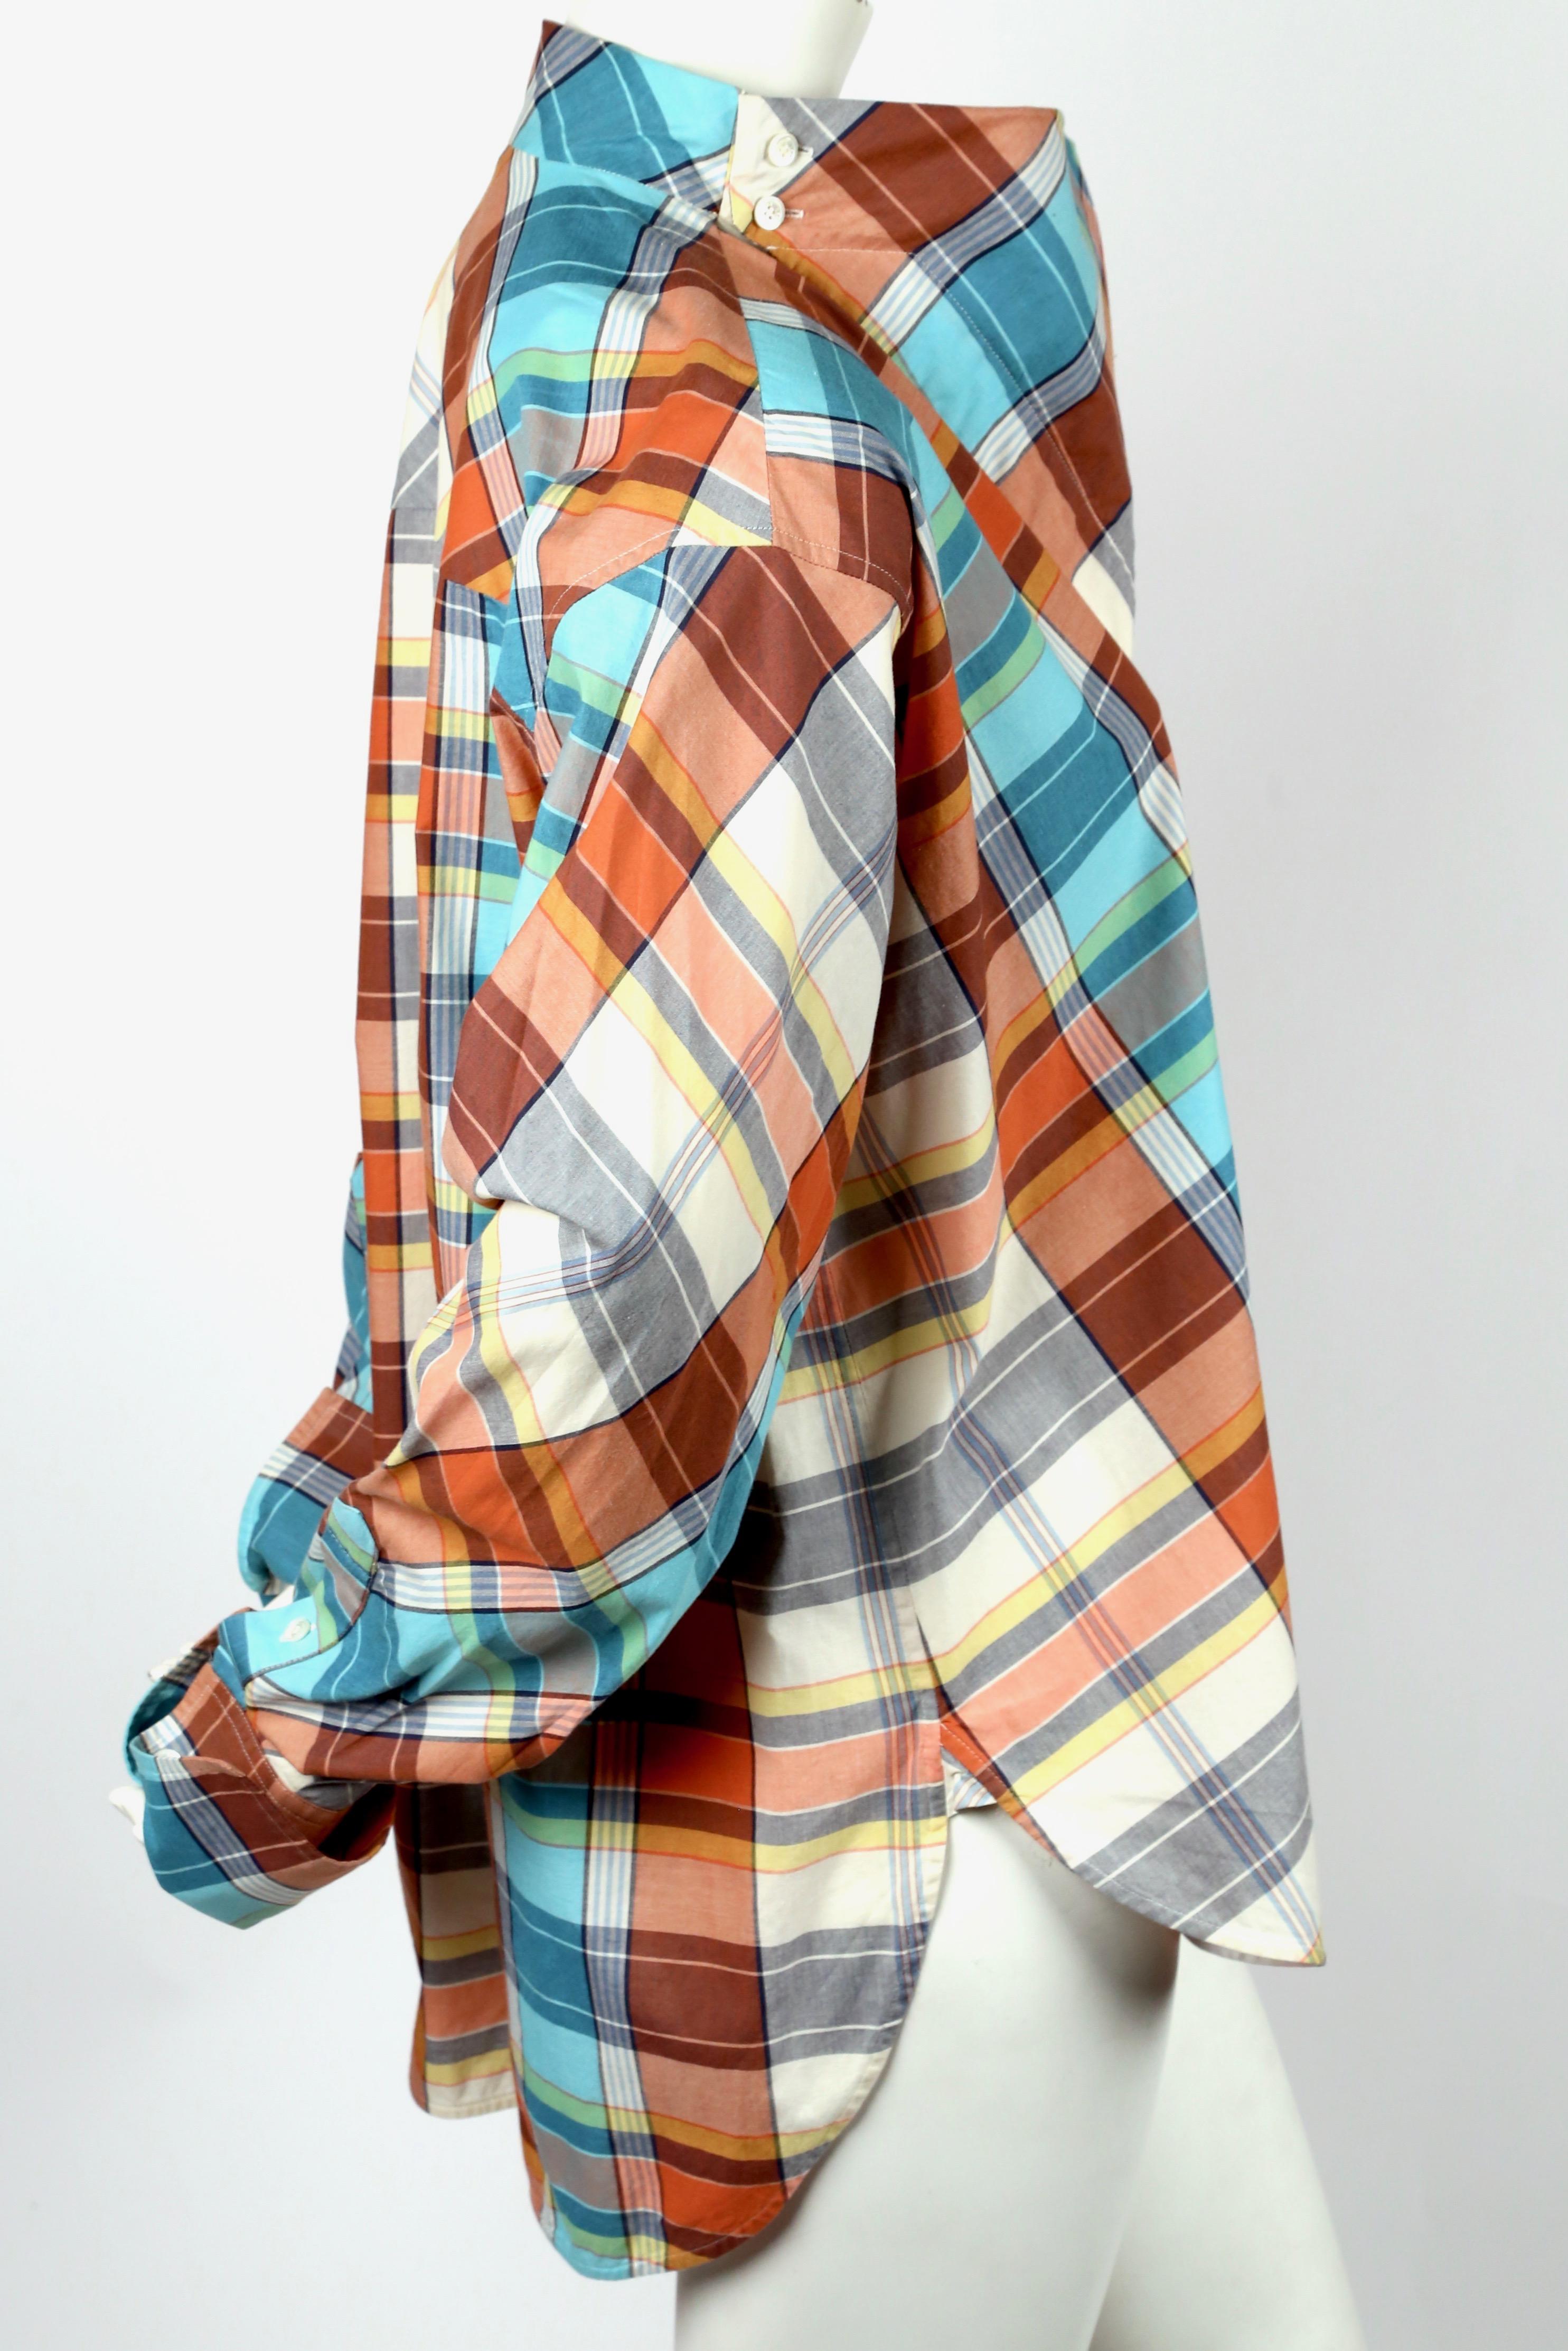 Plaid cotton runway top with draped neckline and French cuffs designed by Phoebe Philo for Celine exactly as seen on the fall 2013 runway. French size 40. Approximate measurements: dropped shoulder 20